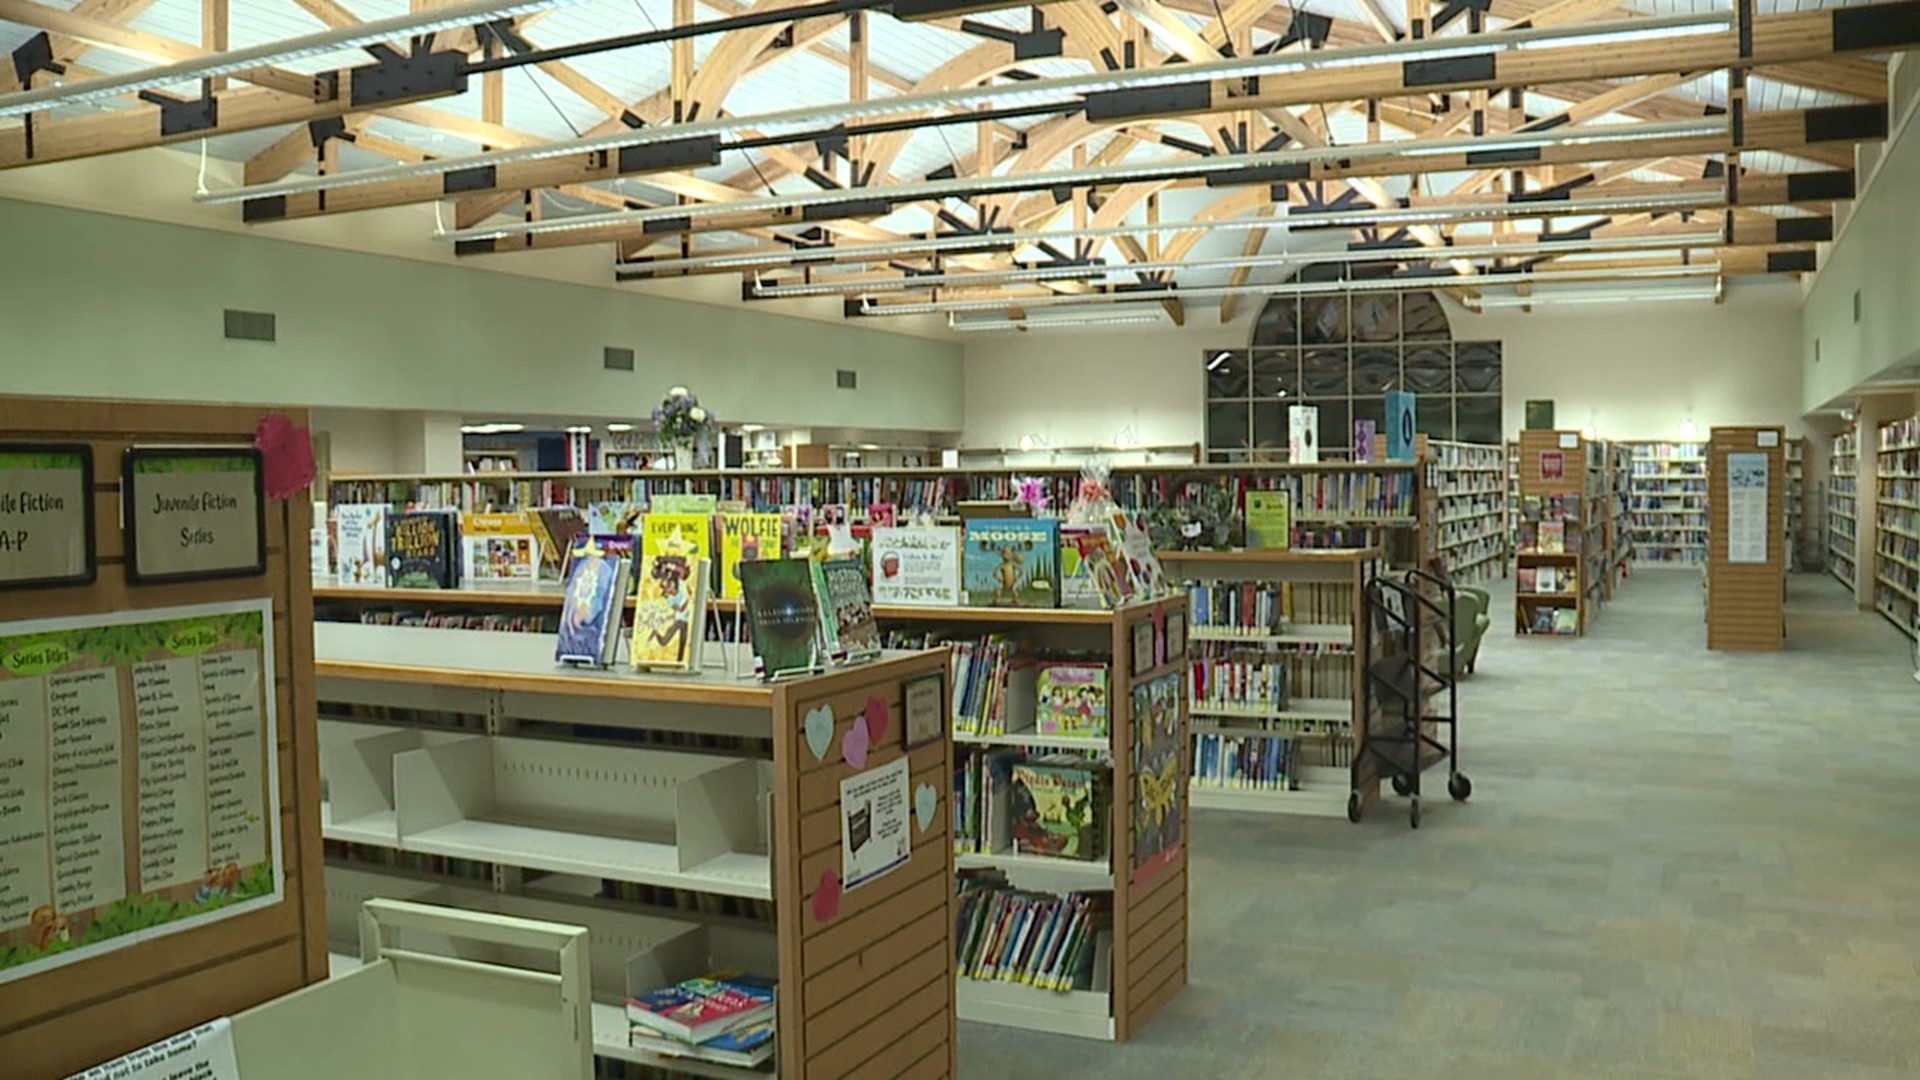 February is National Library Lover's Month and Newswatch 16 checked out how one spot in Lackawanna County is doing.